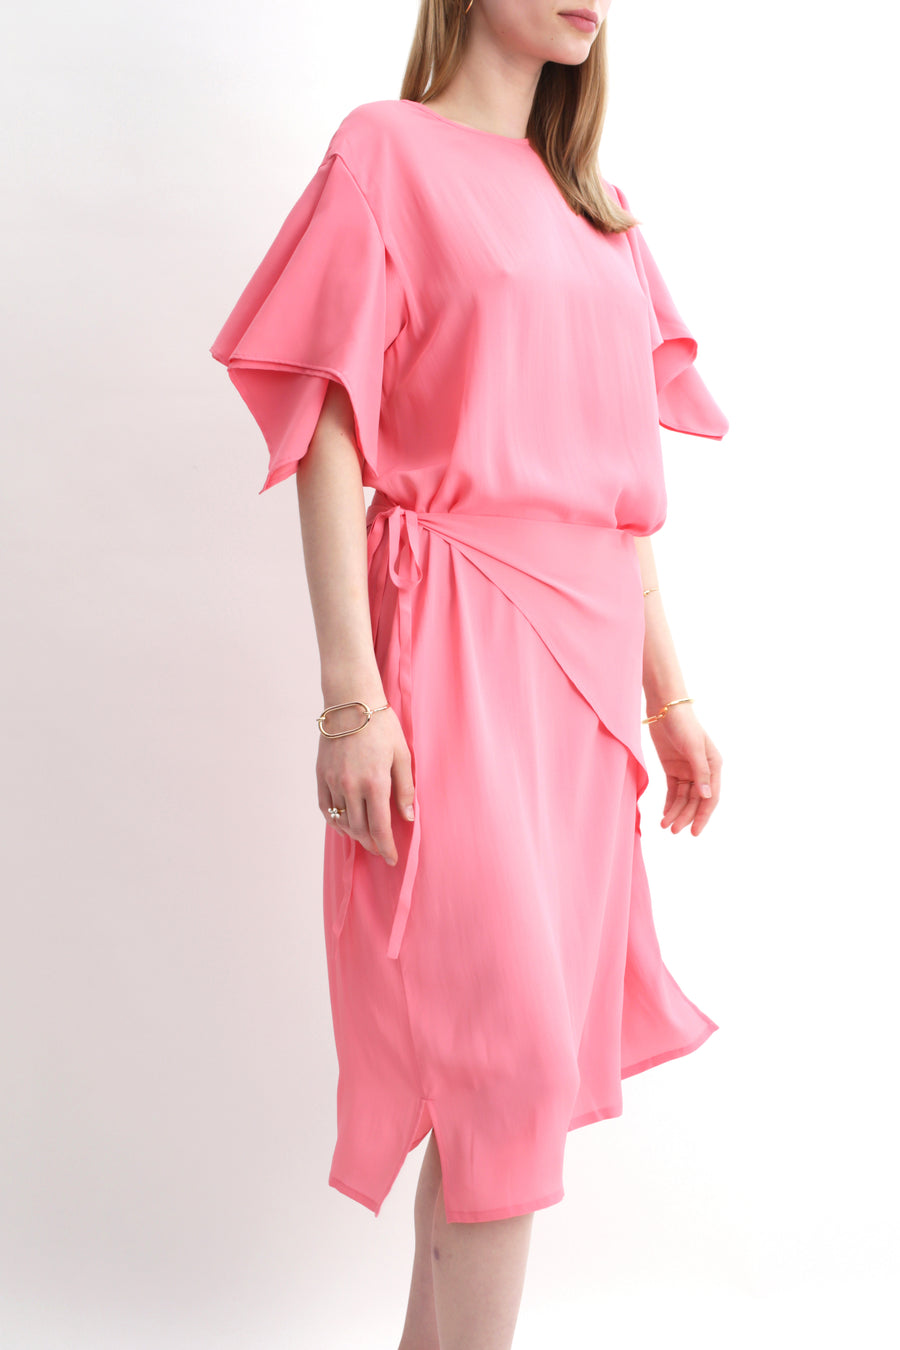 Dress Duvall, bubble pink- limited edition